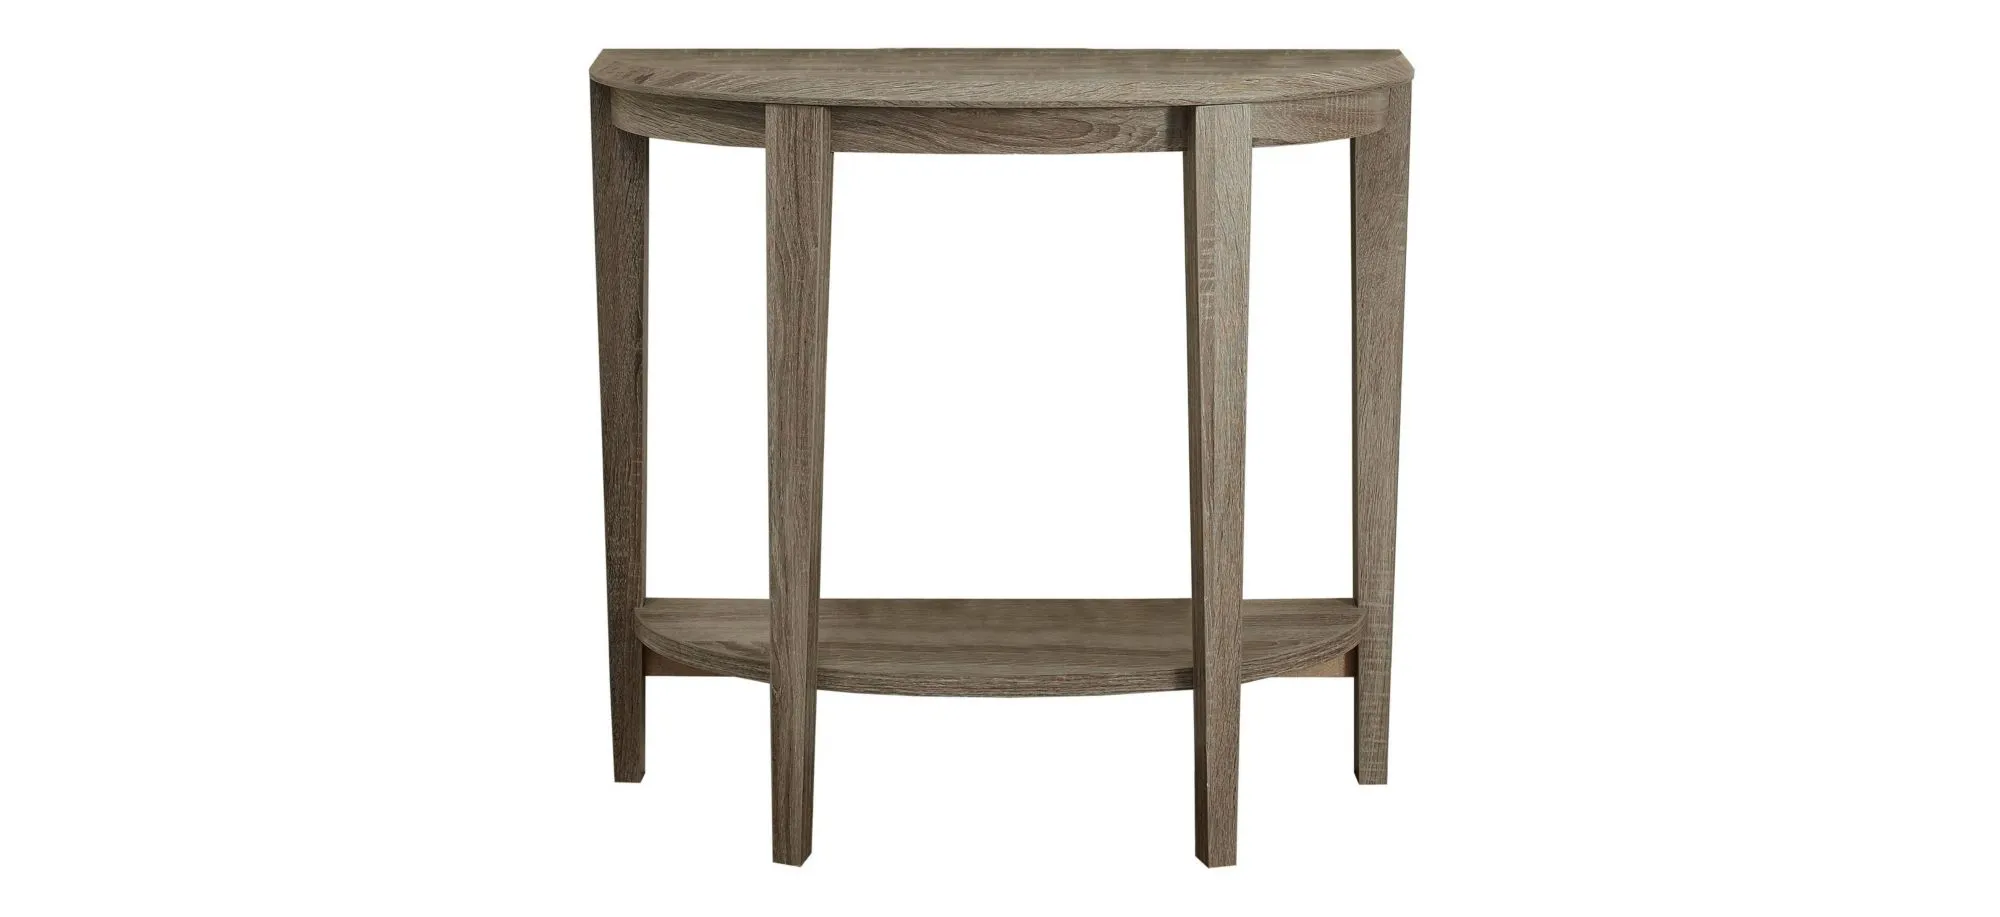 Penfield Accent Table in Dark Taupe by Monarch Specialties